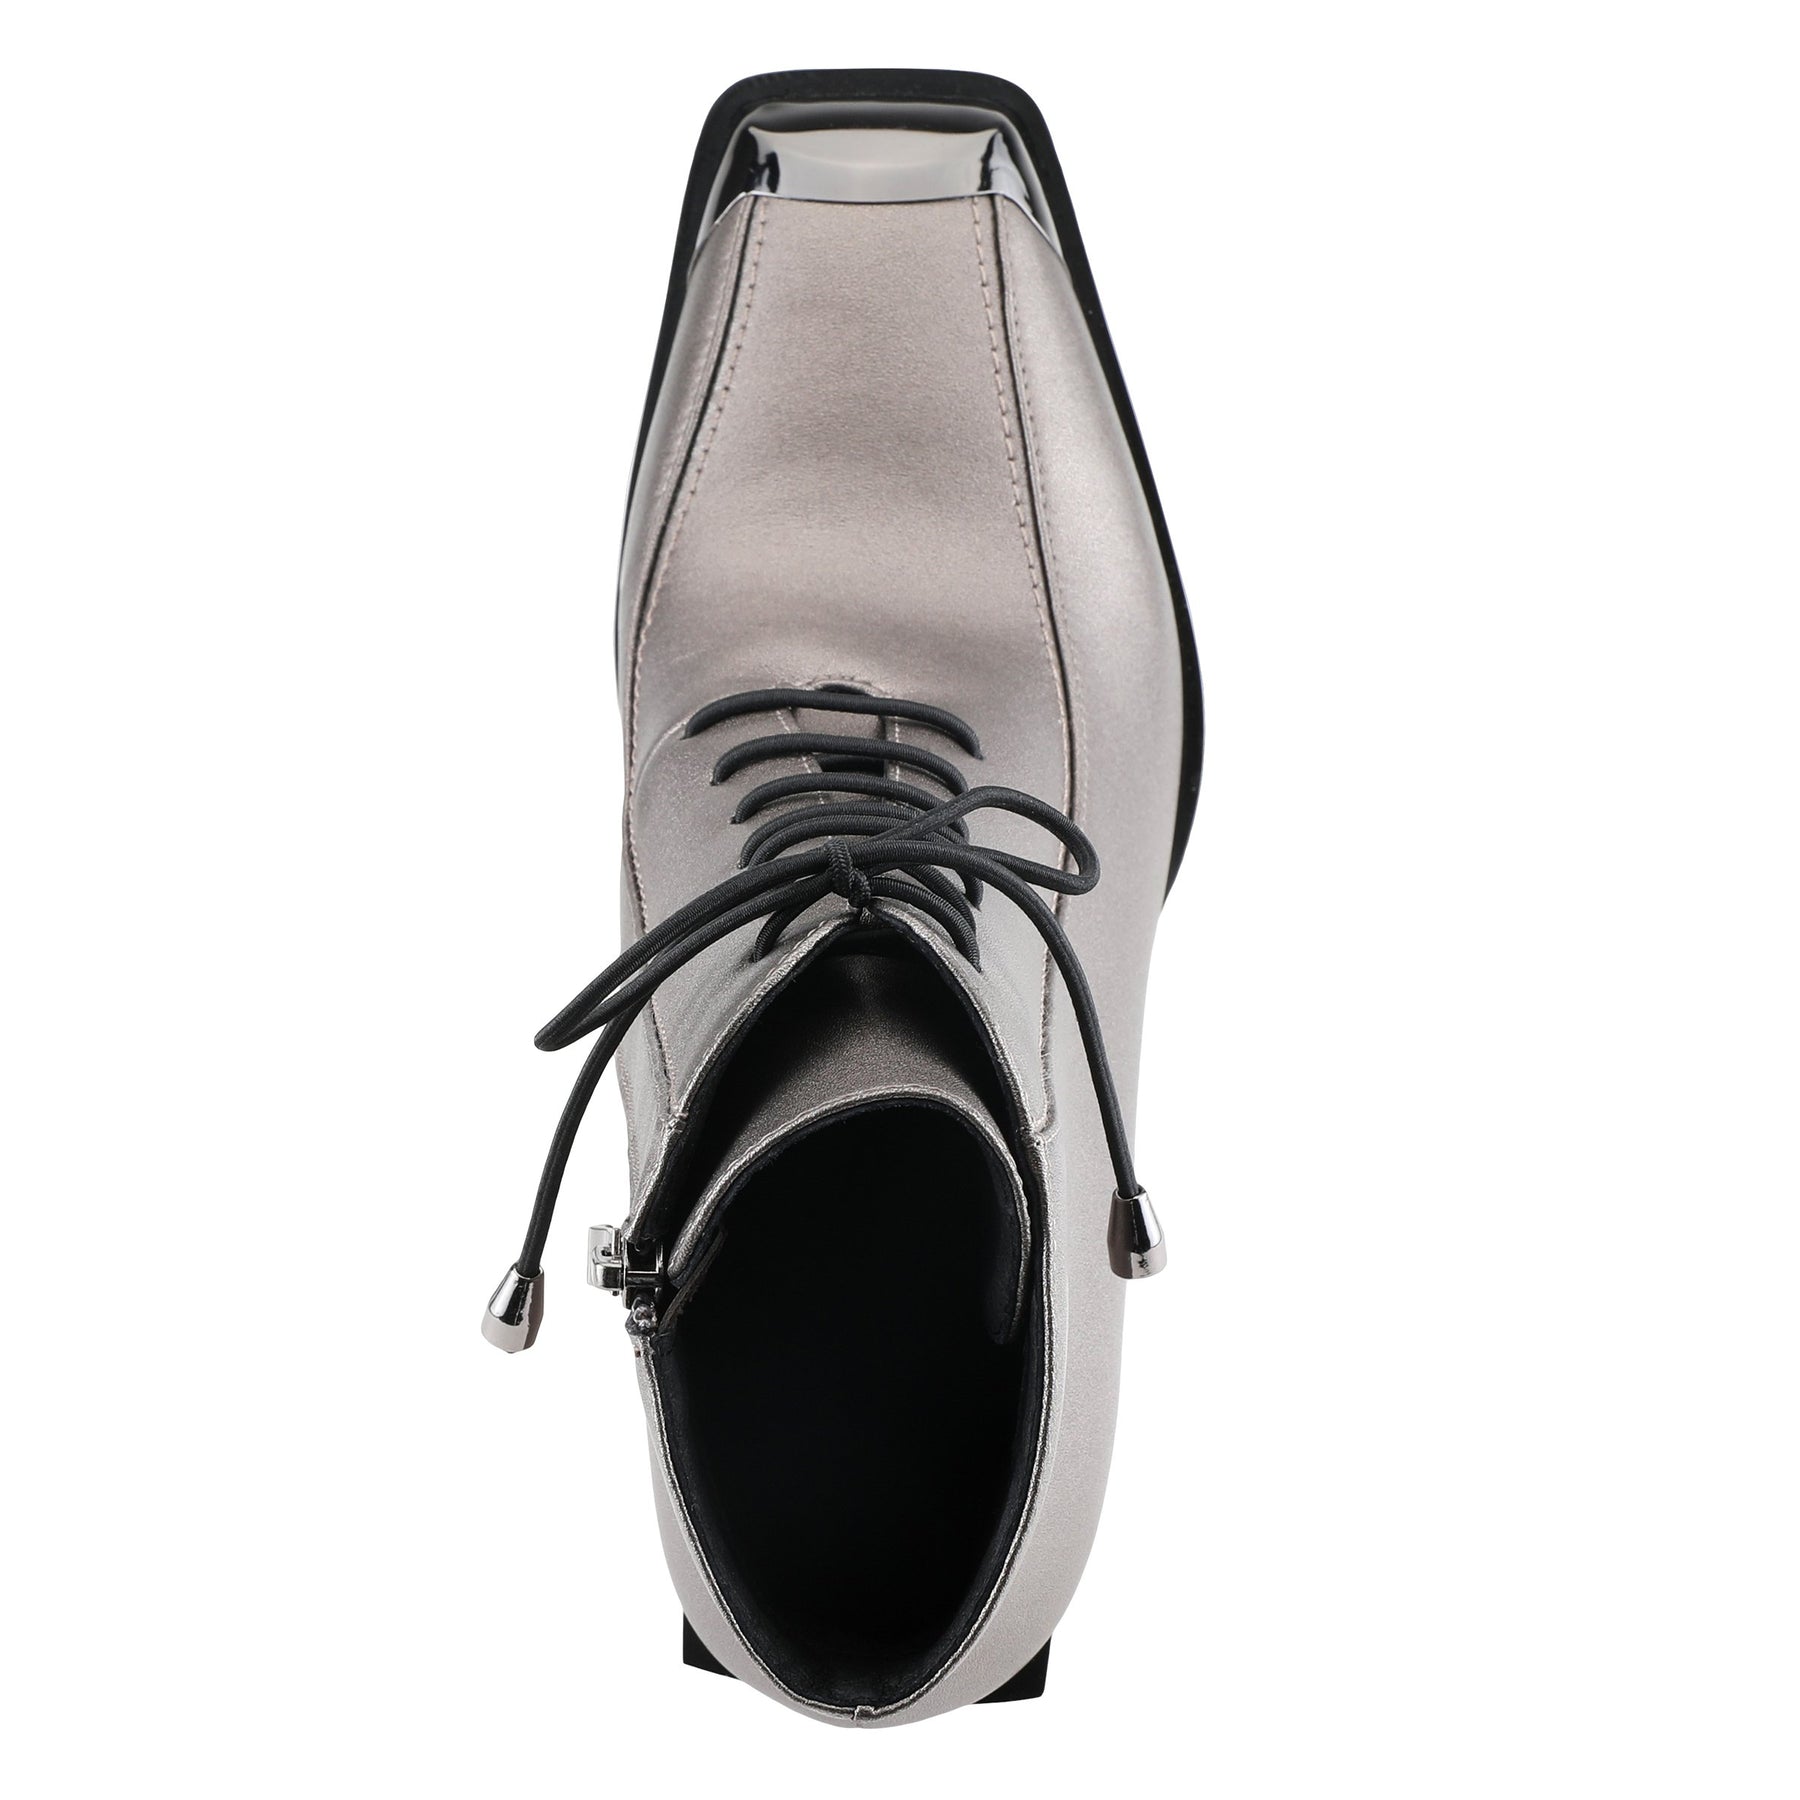 Top view of the azura that girl bootie from spring footwear. This bootie is pewter colored with a black lace up front, a black block heel, and decorative black shiny square toe guard.